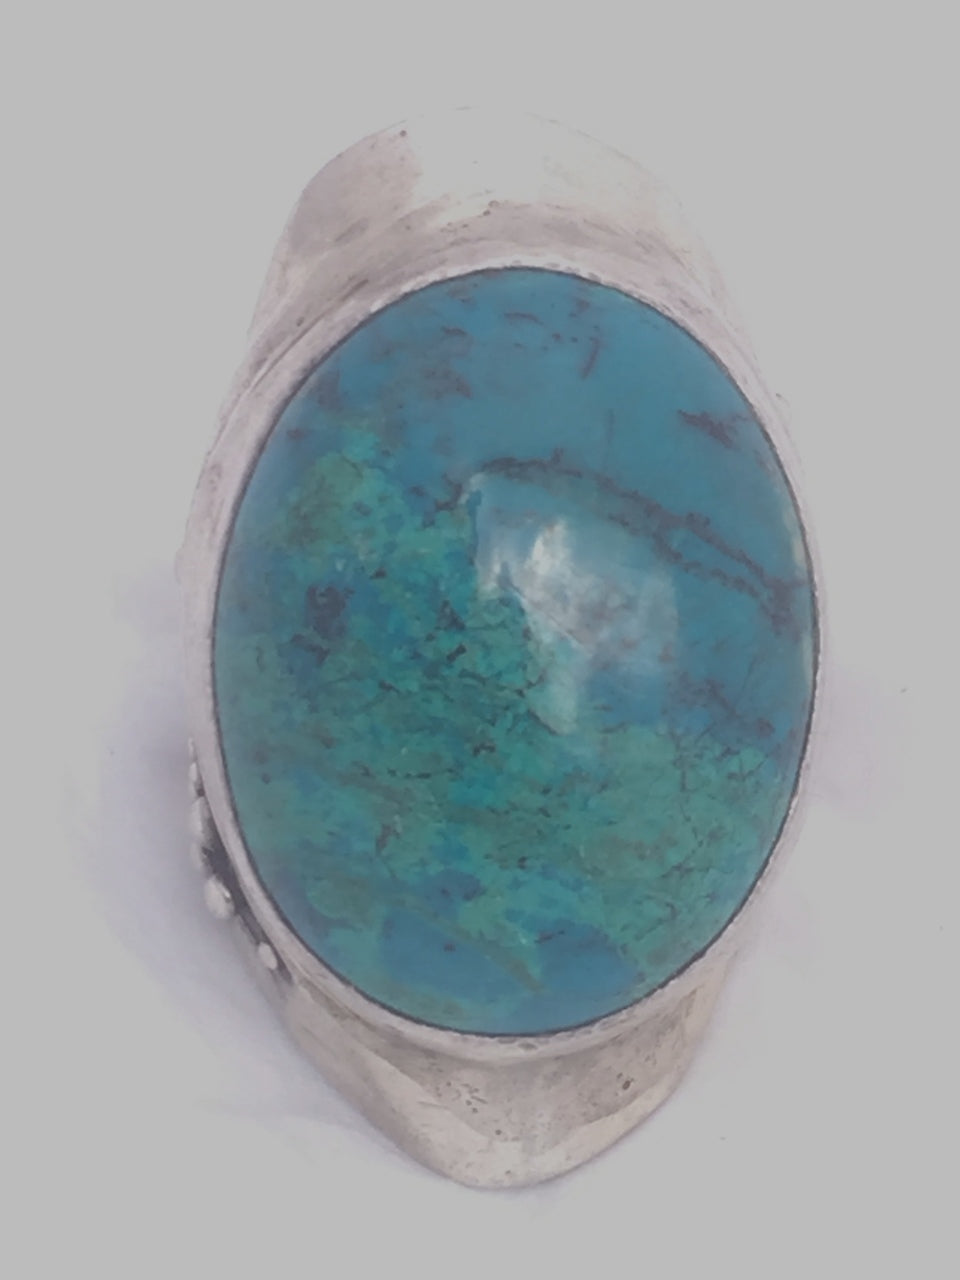 Vintage Sterling Silver Turquoise Tribal Ring   Size 7.25 Weight 38.8g